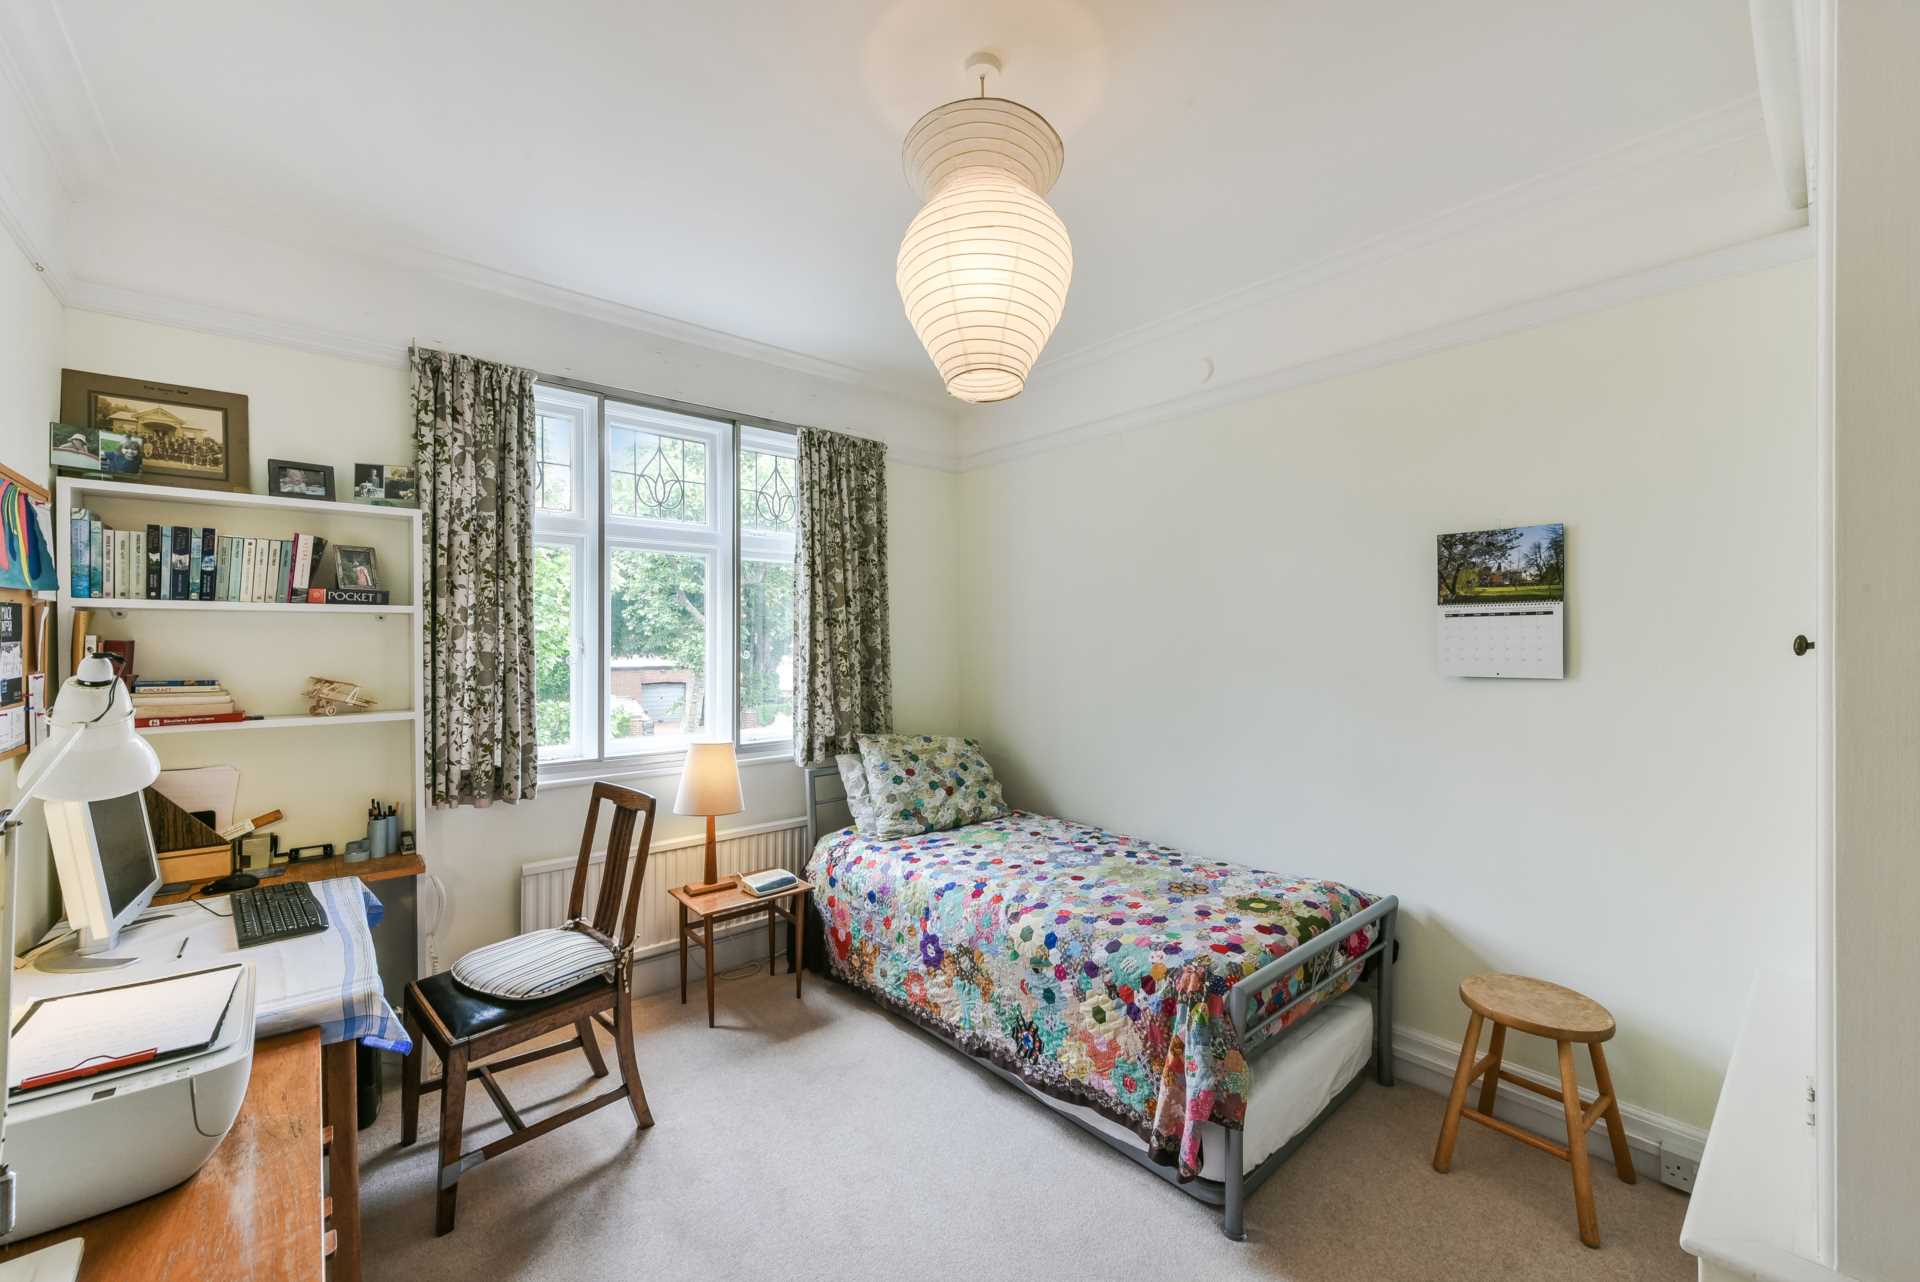 East Dulwich Grove, Dulwich, SE22 8SY, Image 12